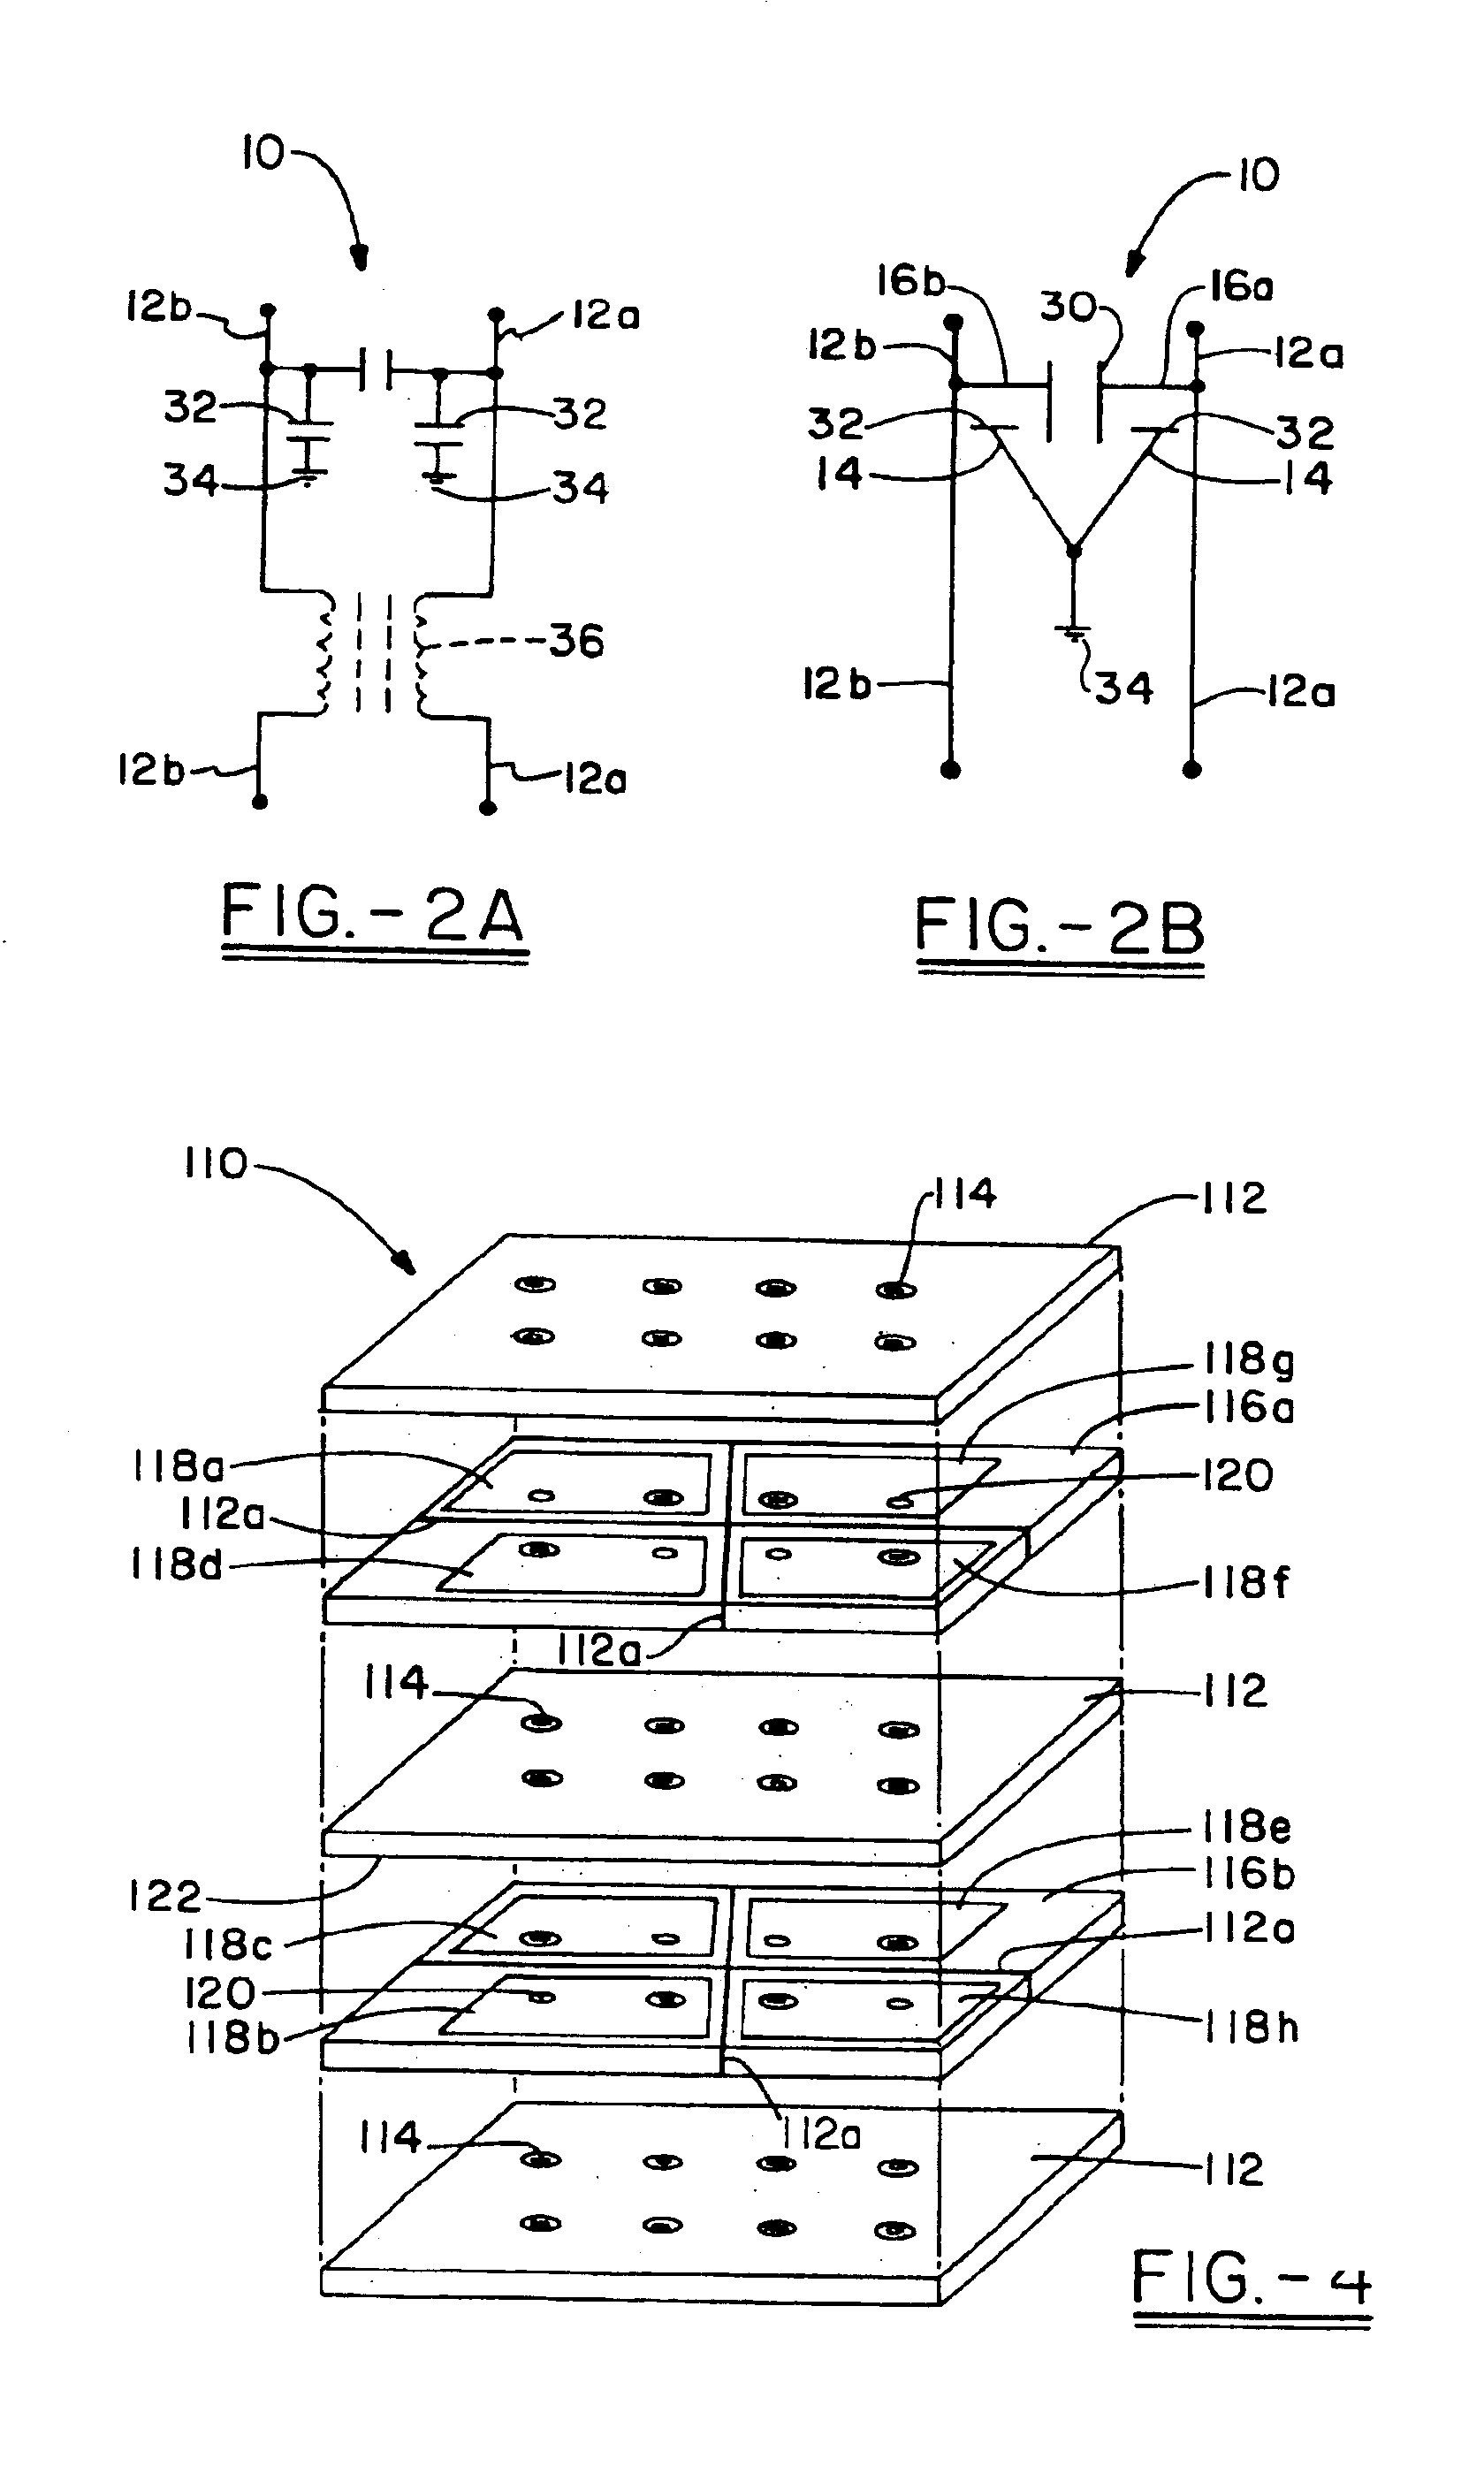 Paired multi-layered dielectric independent passive component architecture resulting in differential and common mode filtering with surge protection in one integrated package